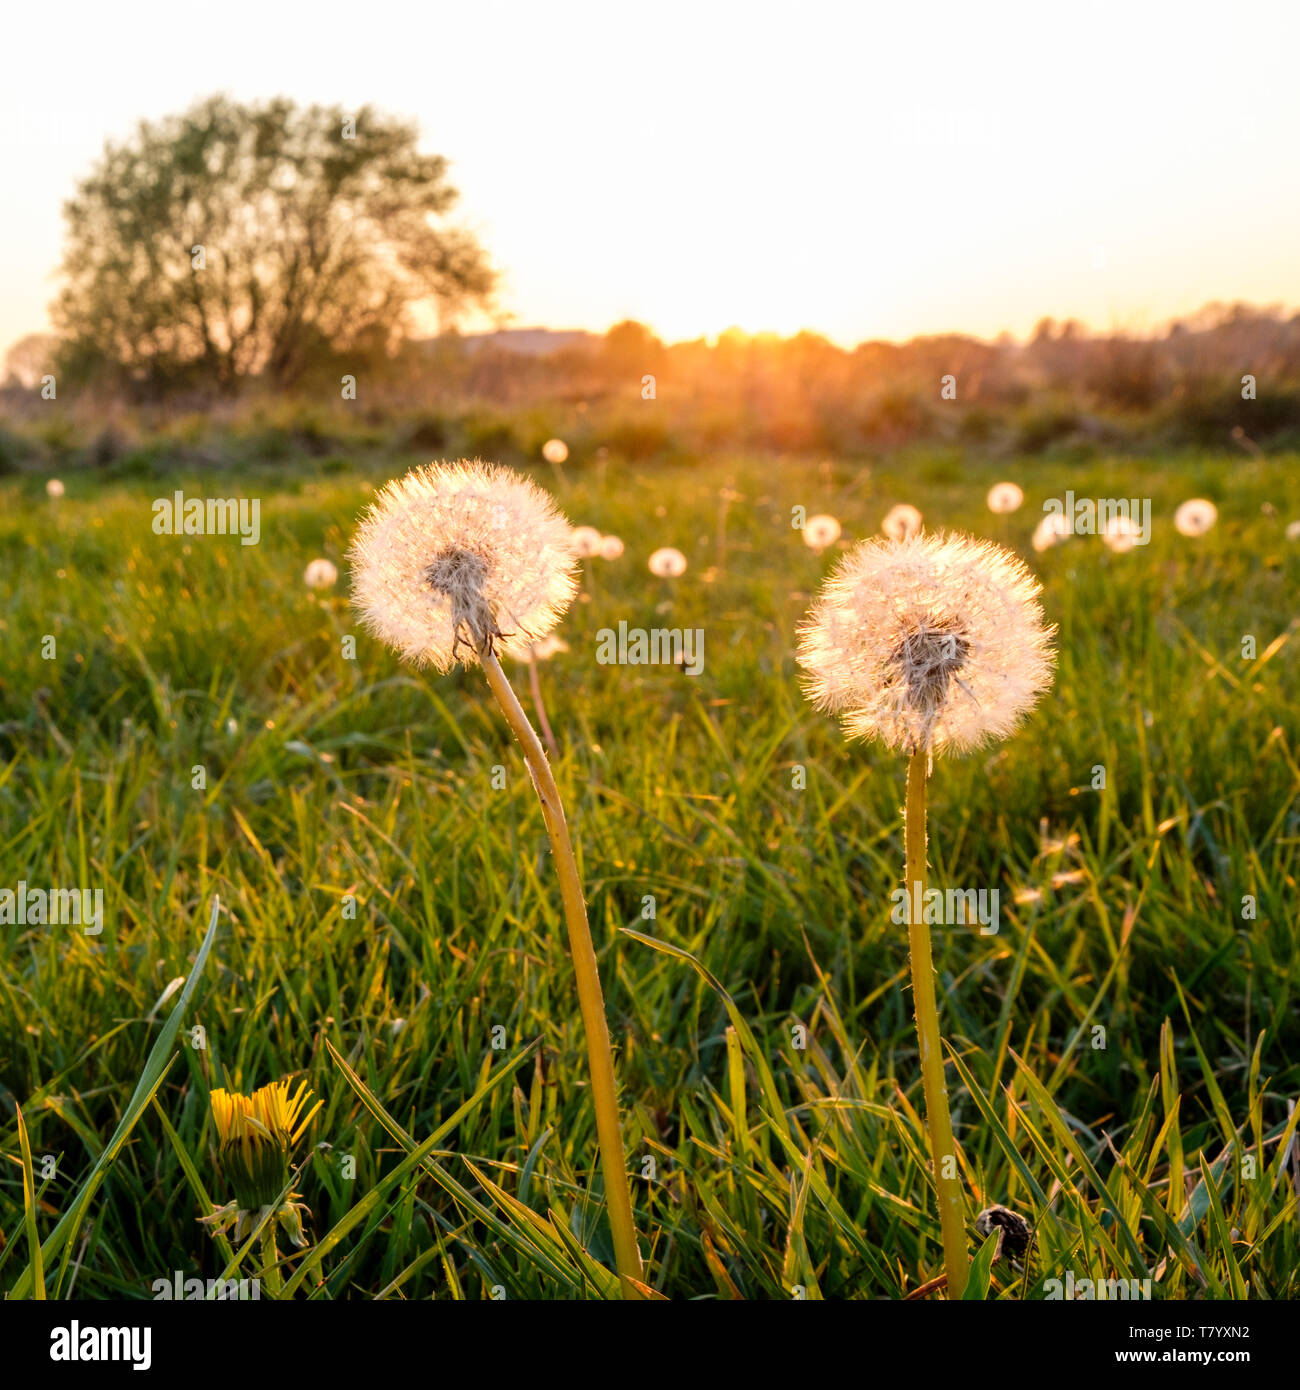 Dandelions and sunlight in a field at sunset, Nottinghamshire, England, UK Stock Photo